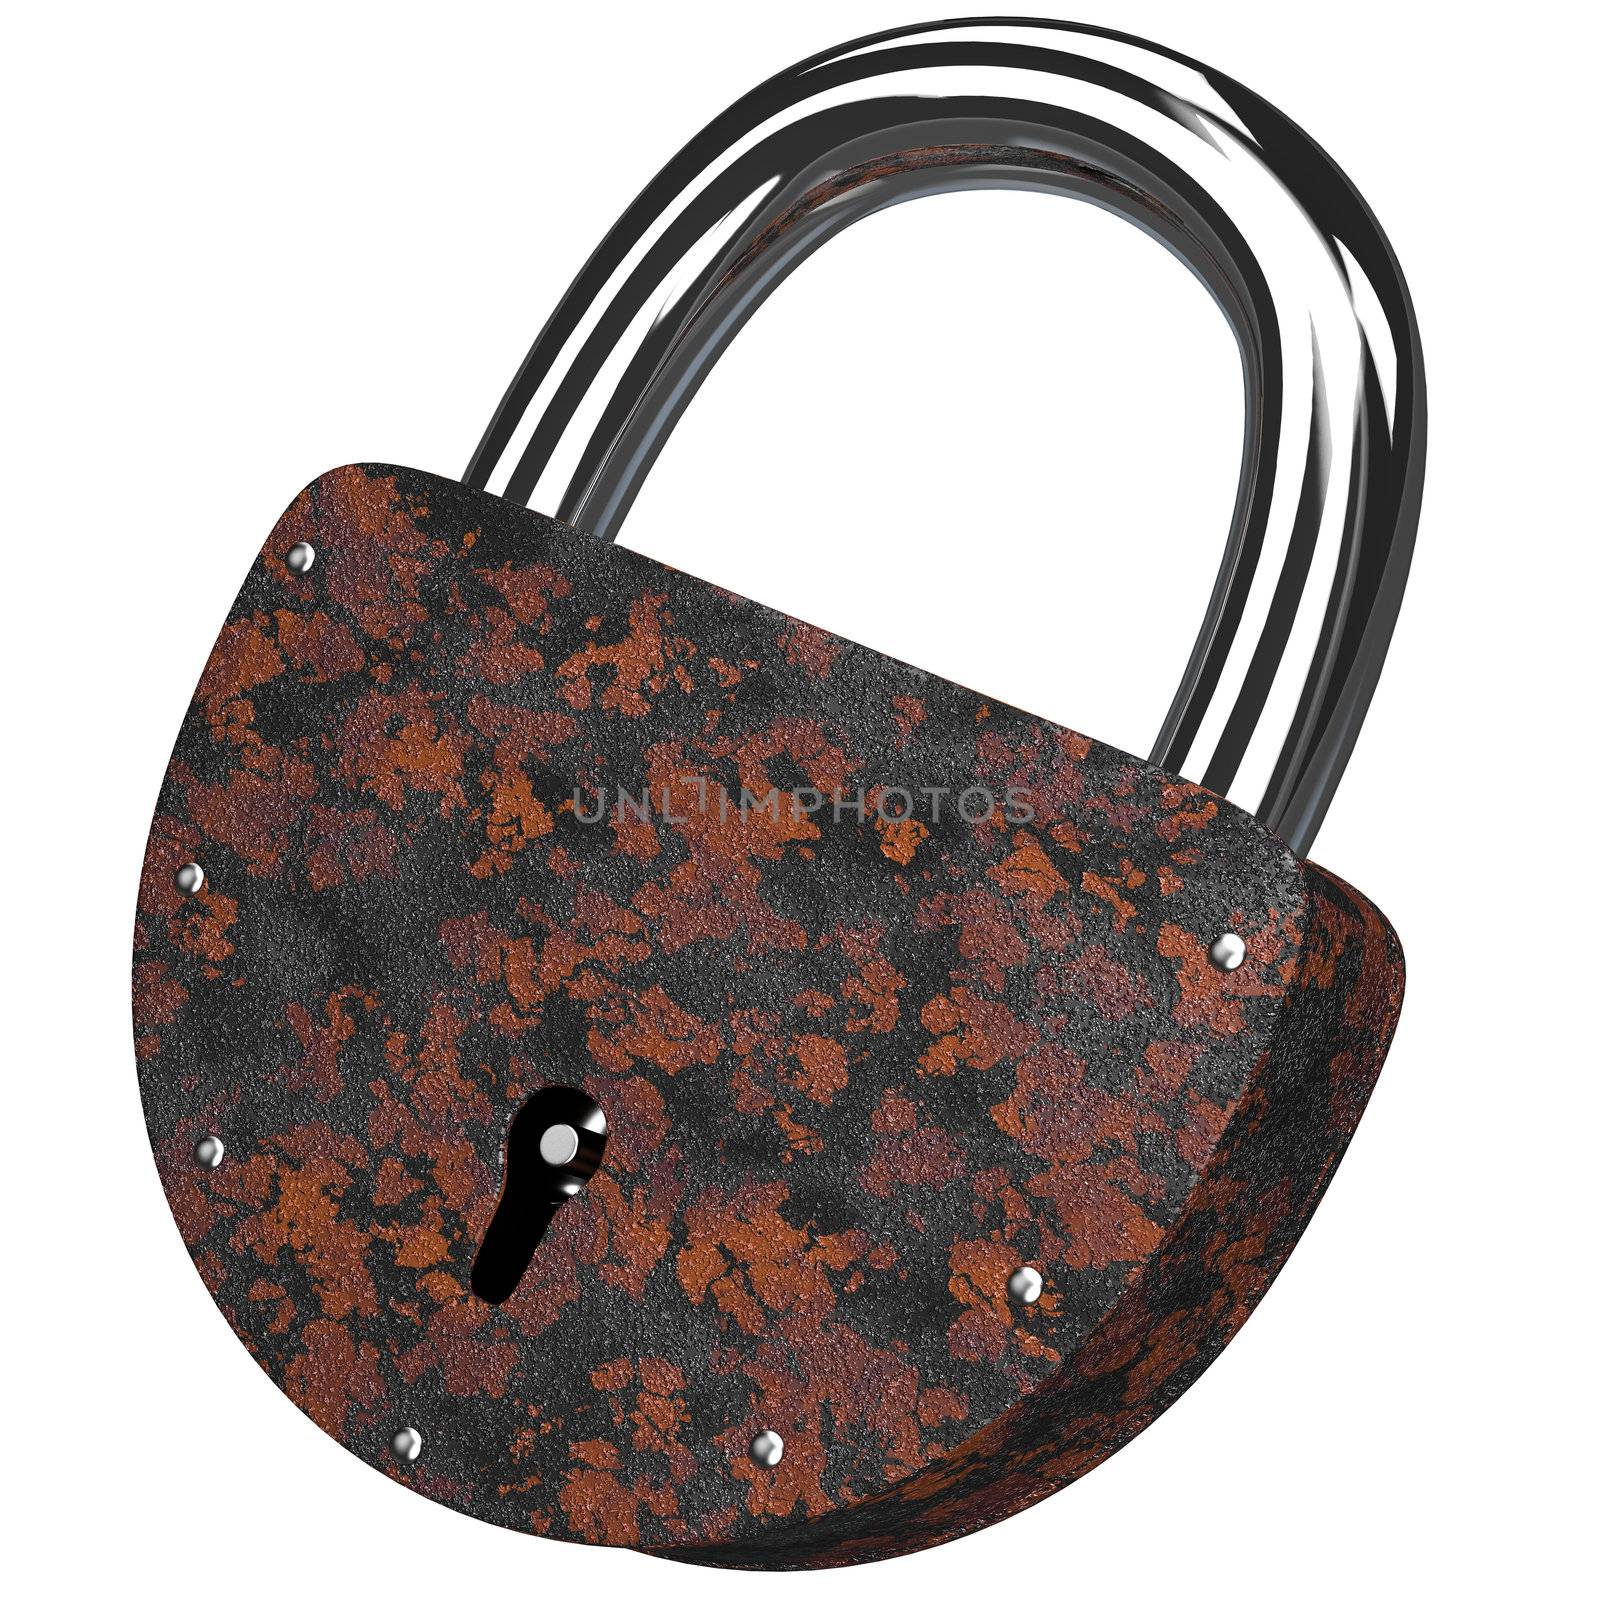 The old rusty lock on a white background